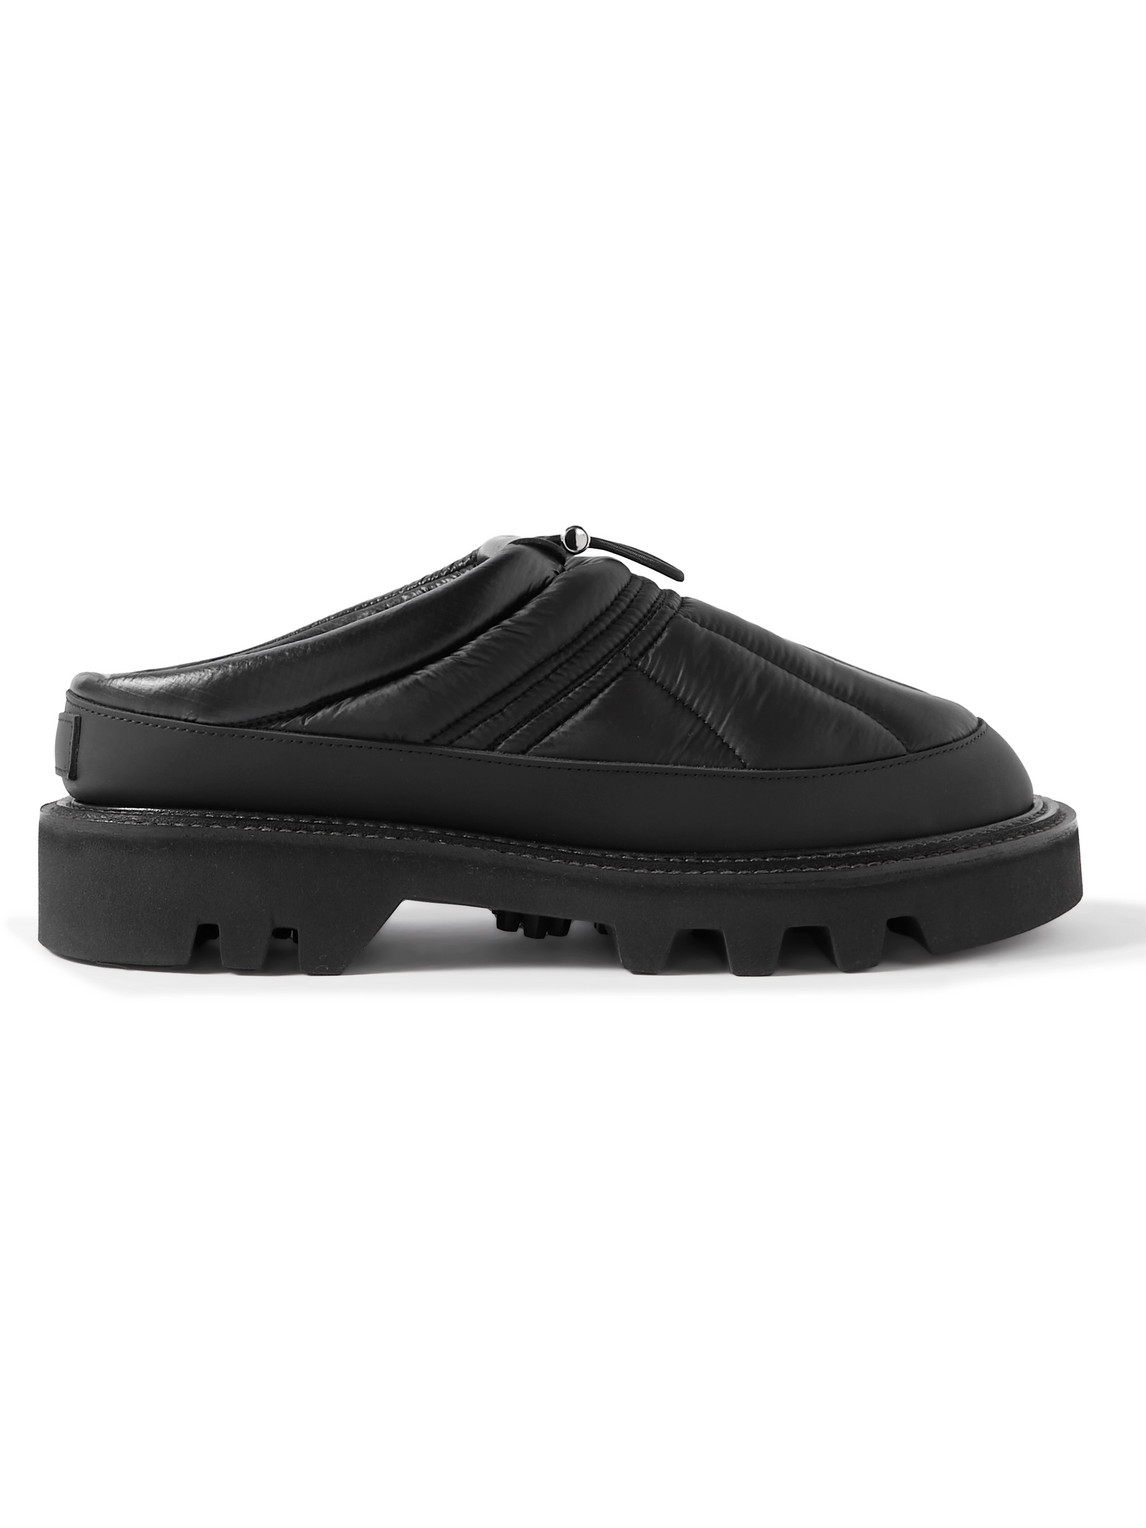 SACAI RUBBER-TRIMMED SHEARLING-LINED QUILTED PADDED SHELL SLIP-ON SNEAKERS